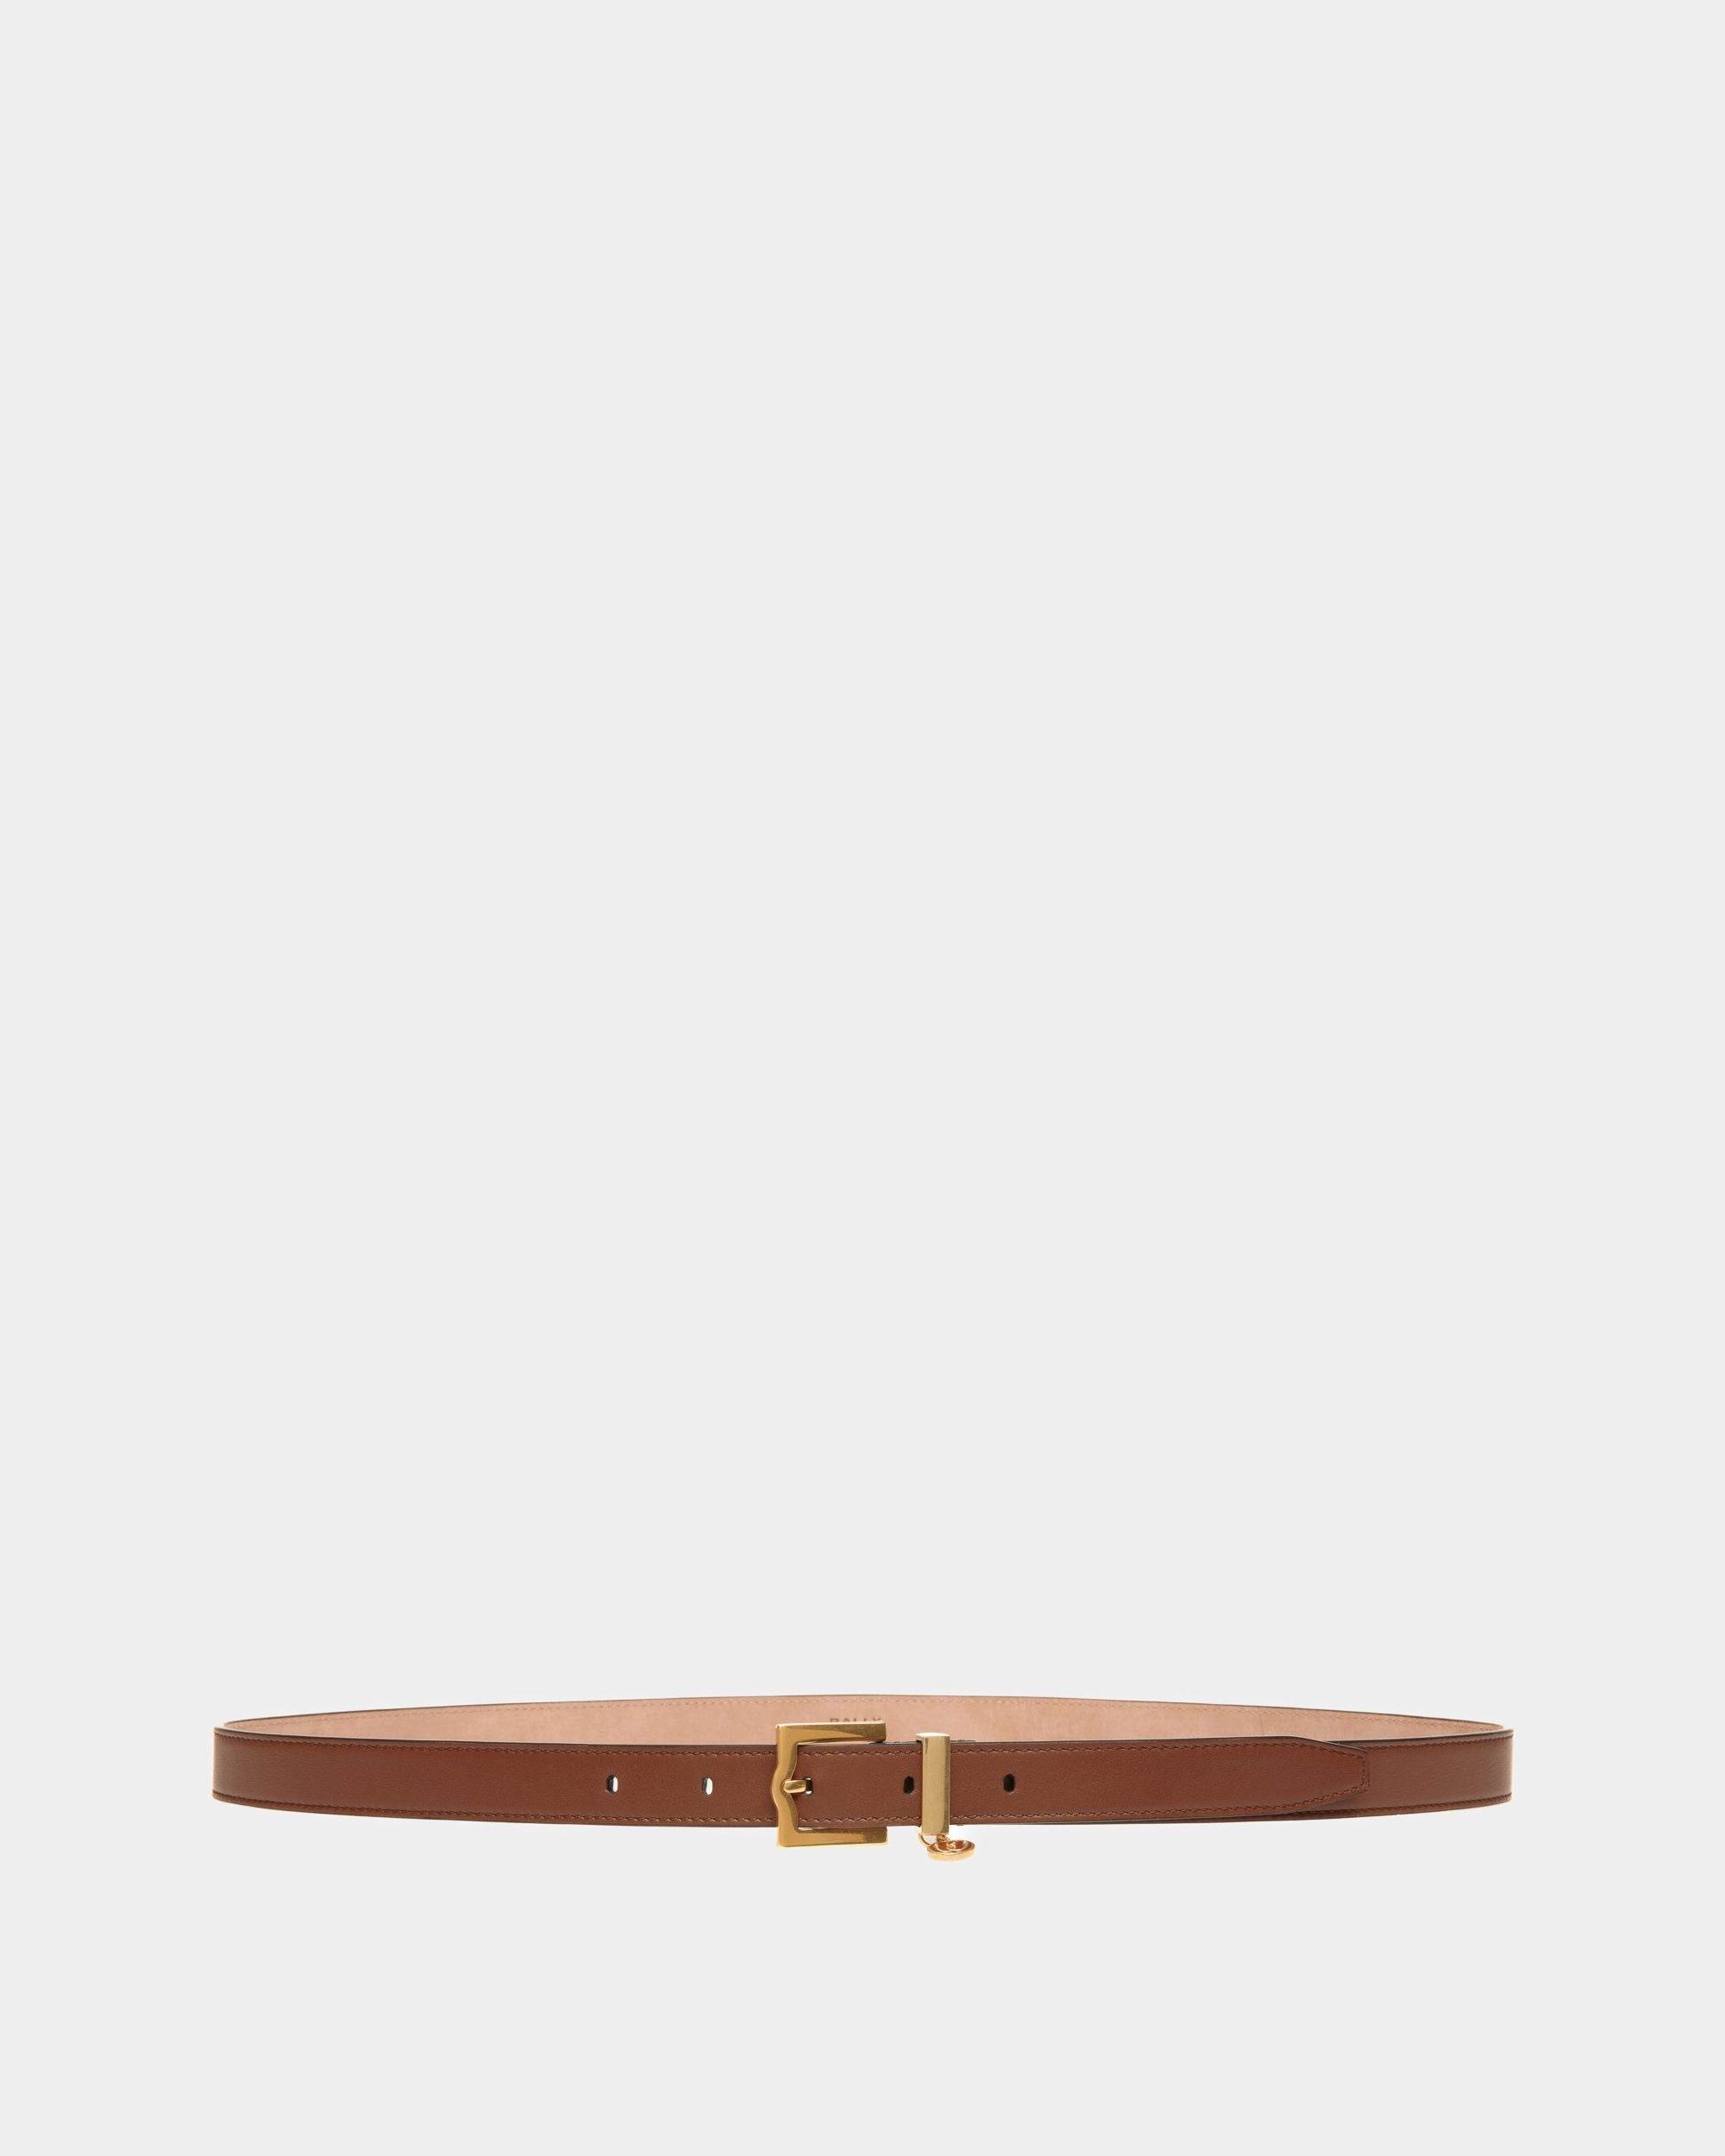 Emblem | Women's Belt in Brown Leather | Bally | Still Life Front